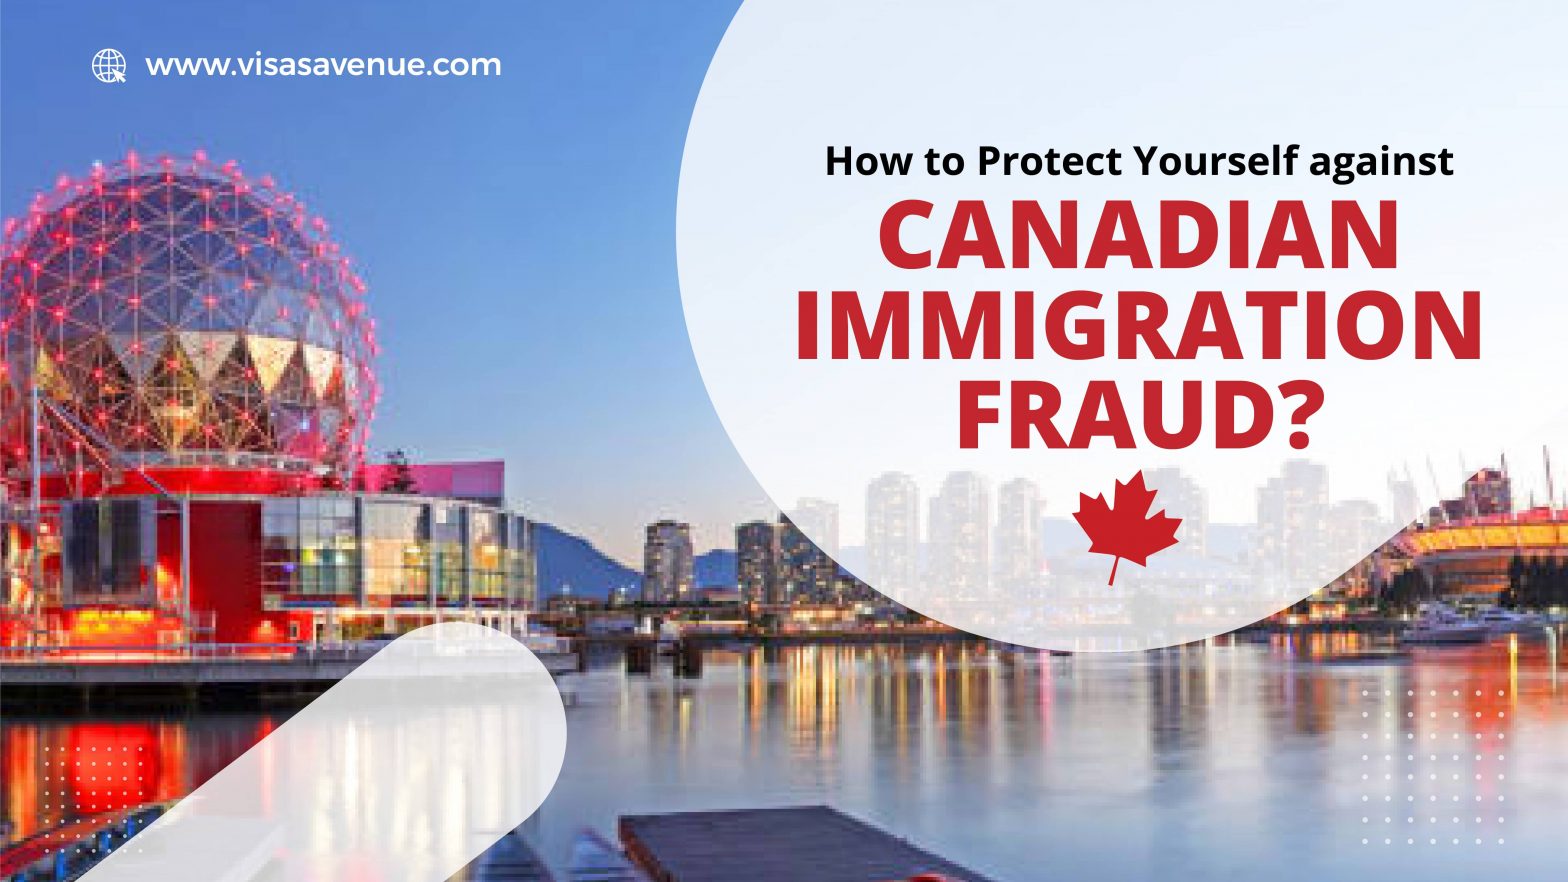 How to protect yourself against Canadian immigration fraud